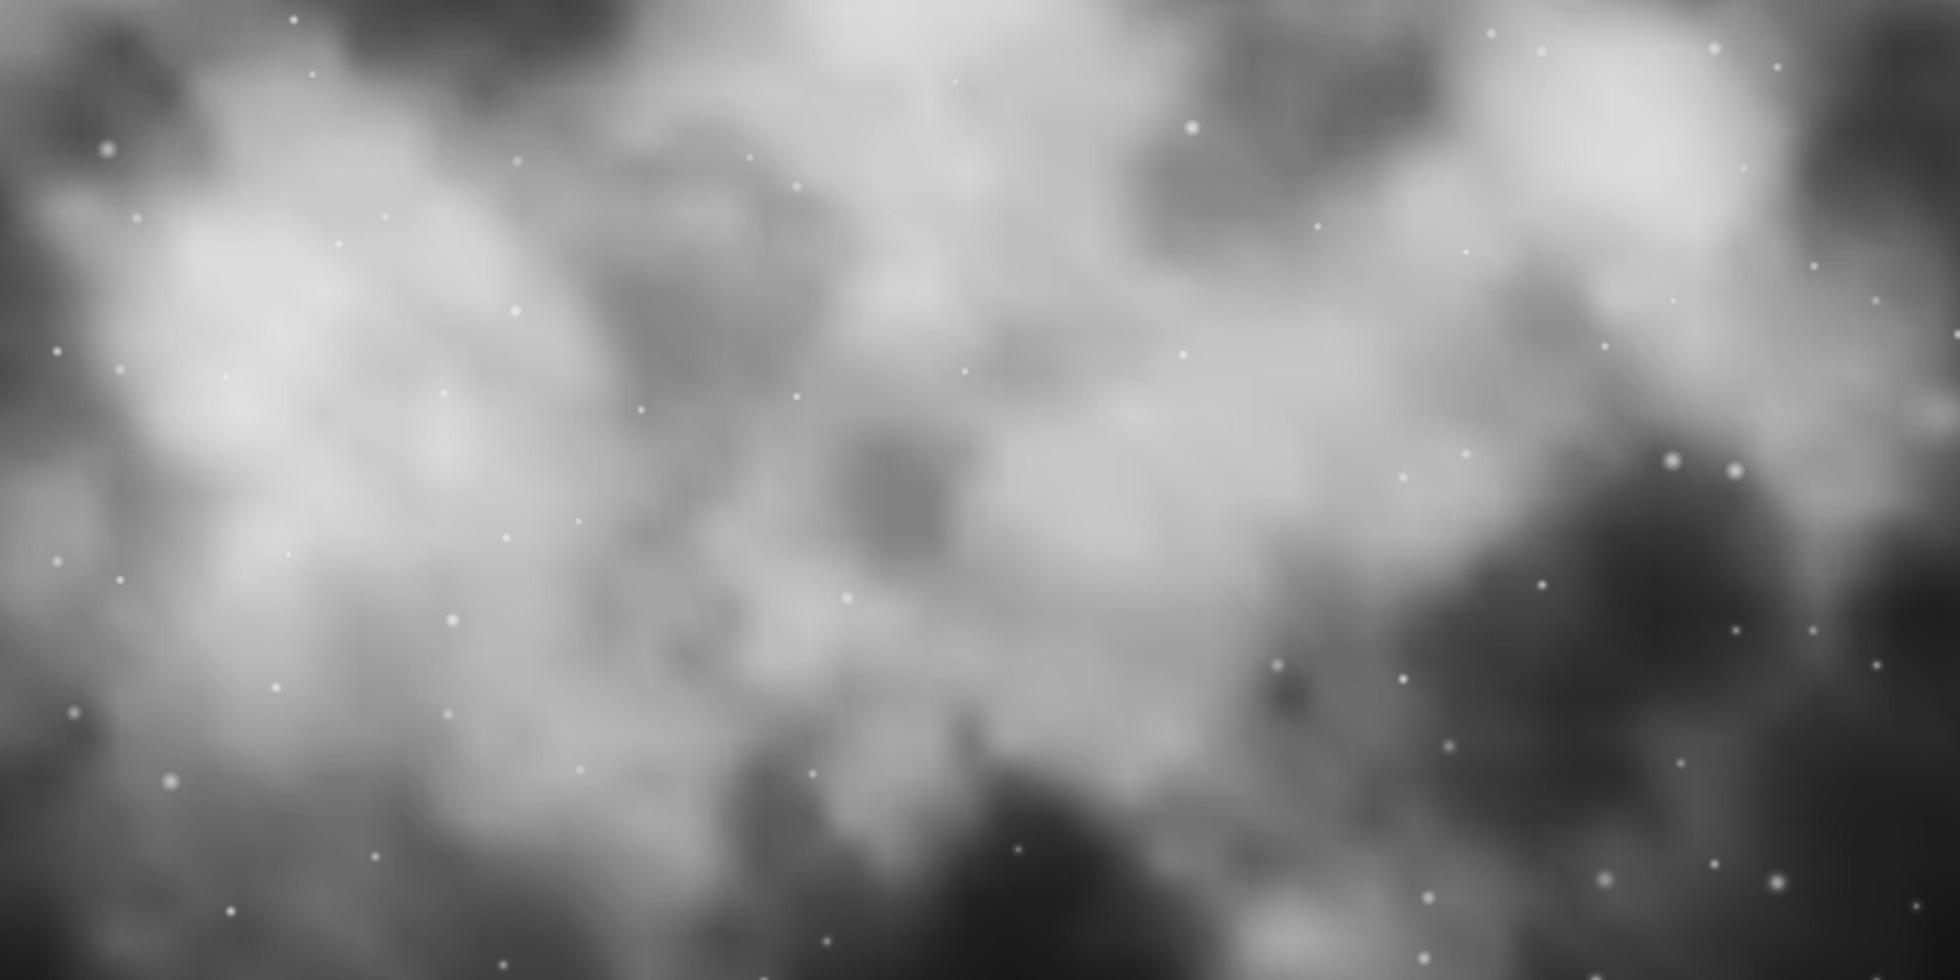 Light Gray vector background with small and big stars.